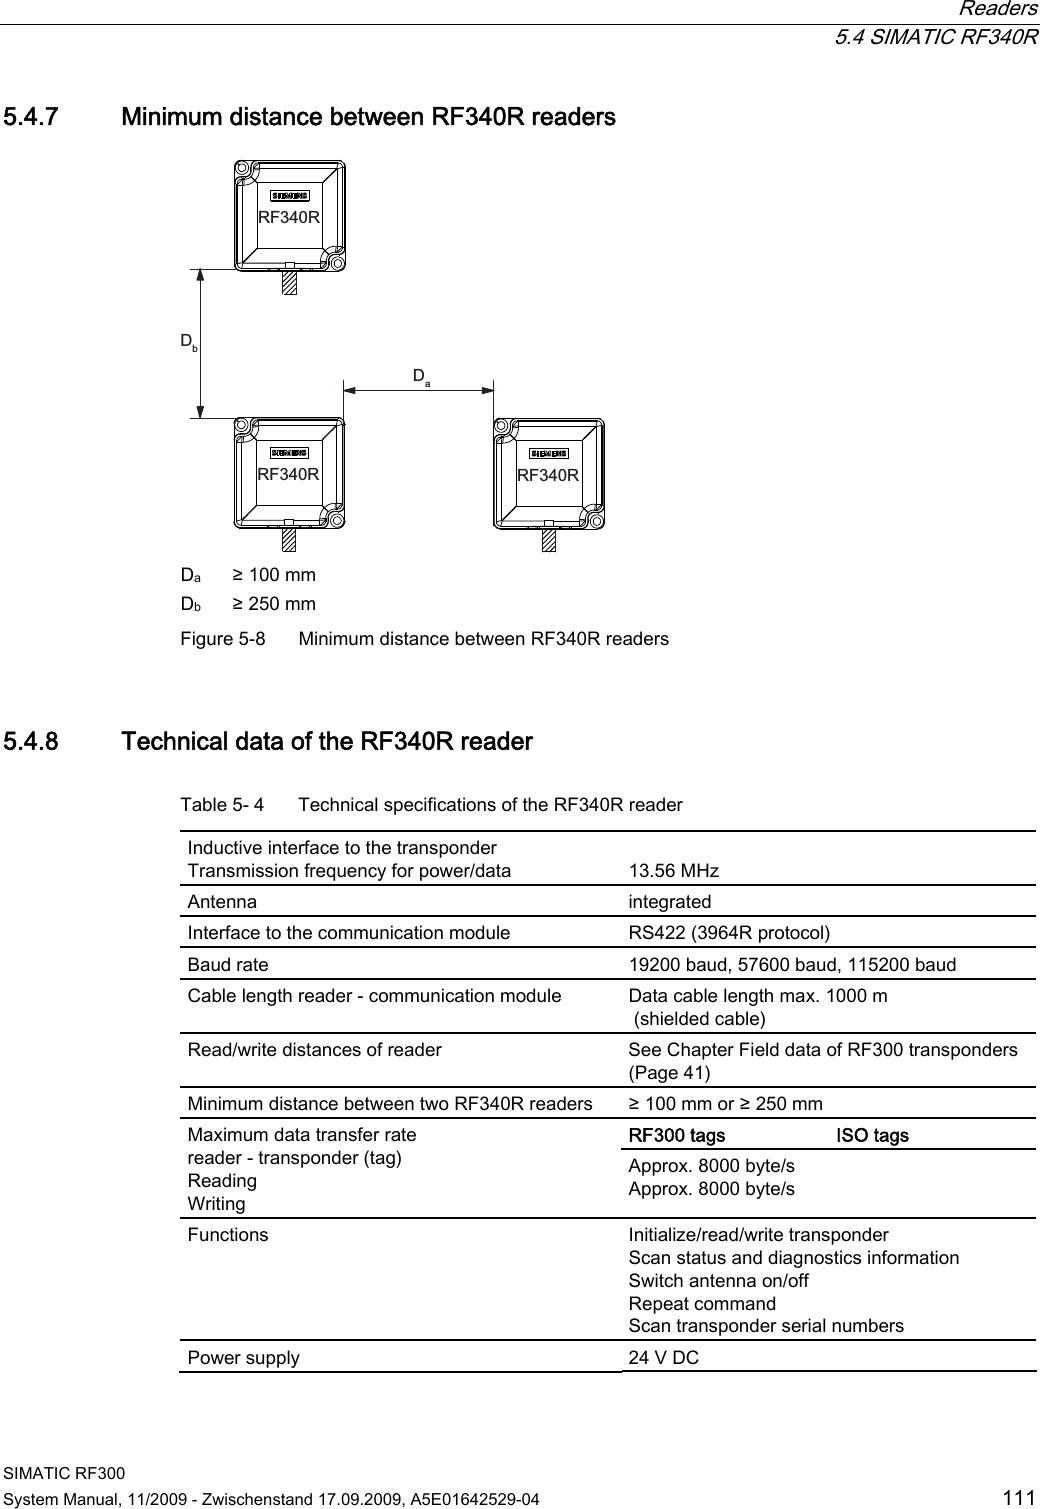  Readers  5.4 SIMATIC RF340R SIMATIC RF300 System Manual, 11/2009 - Zwischenstand 17.09.2009, A5E01642529-04  111 5.4.7 Minimum distance between RF340R readers &apos;D&apos;E5)55)5 5)5 Da  ≥ 100 mm Db  ≥ 250 mm Figure 5-8  Minimum distance between RF340R readers 5.4.8 Technical data of the RF340R reader Table 5- 4  Technical specifications of the RF340R reader Inductive interface to the transponder Transmission frequency for power/data  13.56 MHz Antenna  integrated Interface to the communication module  RS422 (3964R protocol) Baud rate  19200 baud, 57600 baud, 115200 baud Cable length reader - communication module  Data cable length max. 1000 m  (shielded cable) Read/write distances of reader  See Chapter Field data of RF300 transponders (Page 41) Minimum distance between two RF340R readers  ≥ 100 mm or ≥ 250 mm RF300 tags ISO tags Maximum data transfer rate reader - transponder (tag) Reading Writing Approx. 8000 byte/s Approx. 8000 byte/s  Functions  Initialize/read/write transponder Scan status and diagnostics information Switch antenna on/off Repeat command Scan transponder serial numbers Power supply  24 V DC 